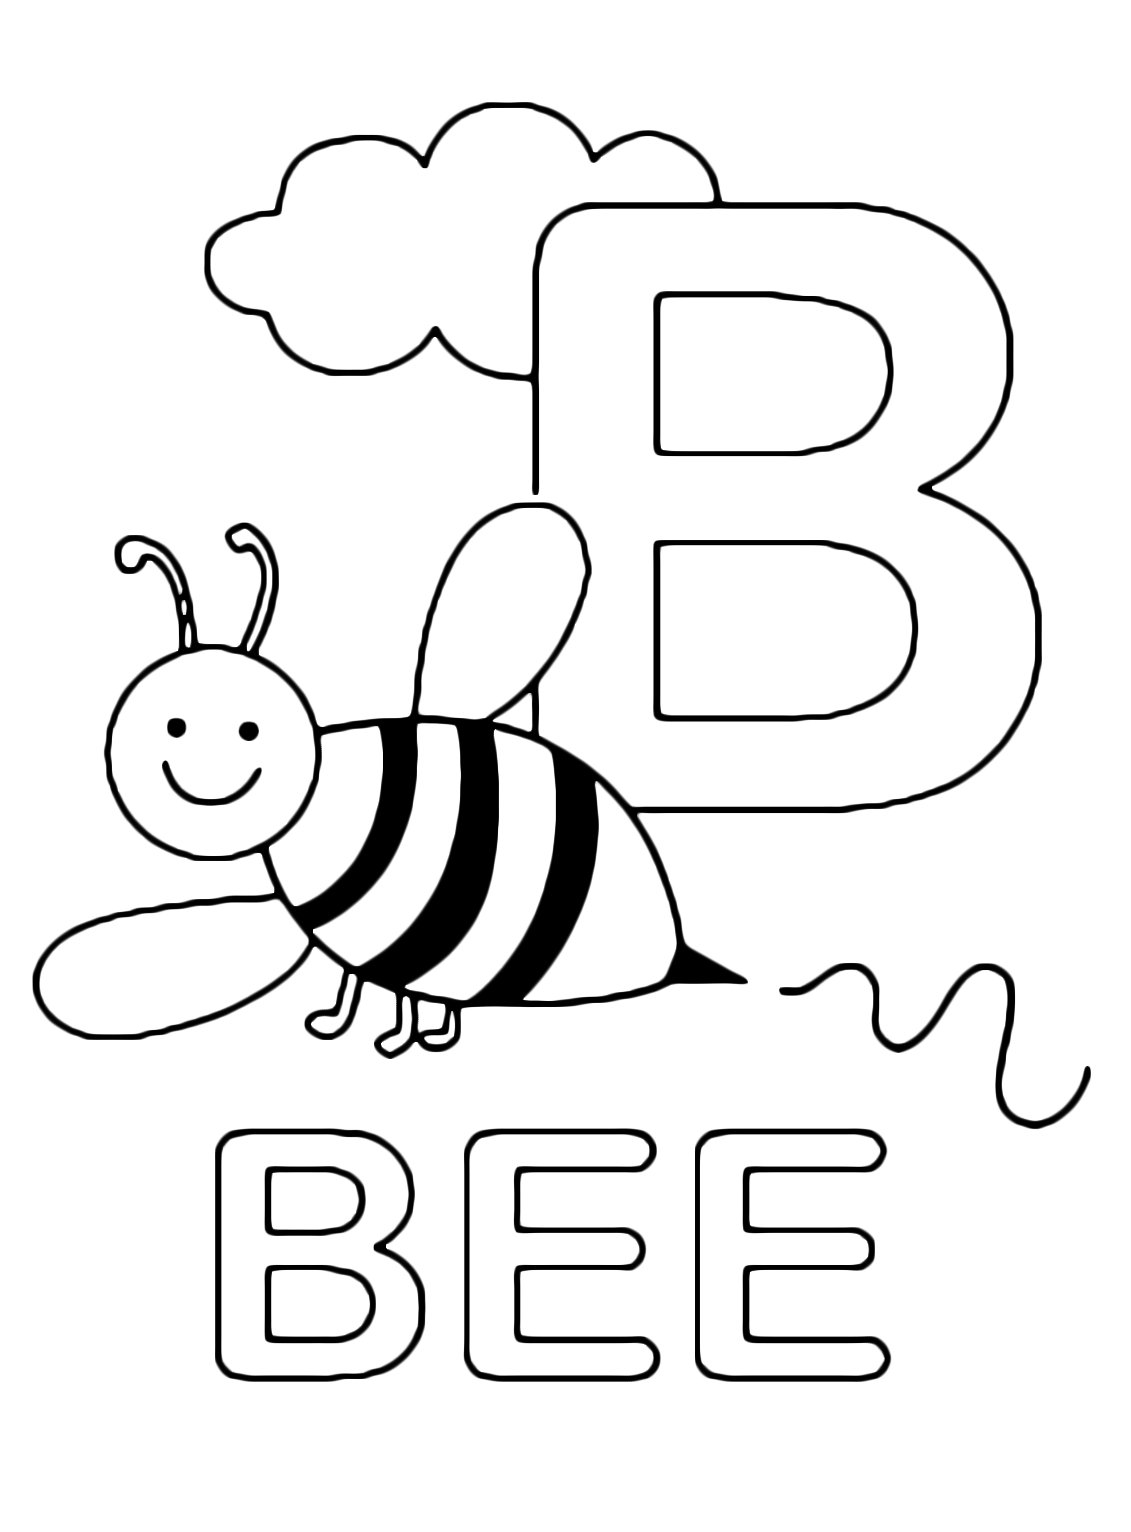 Letters and numbers - B for bee uppercase letter